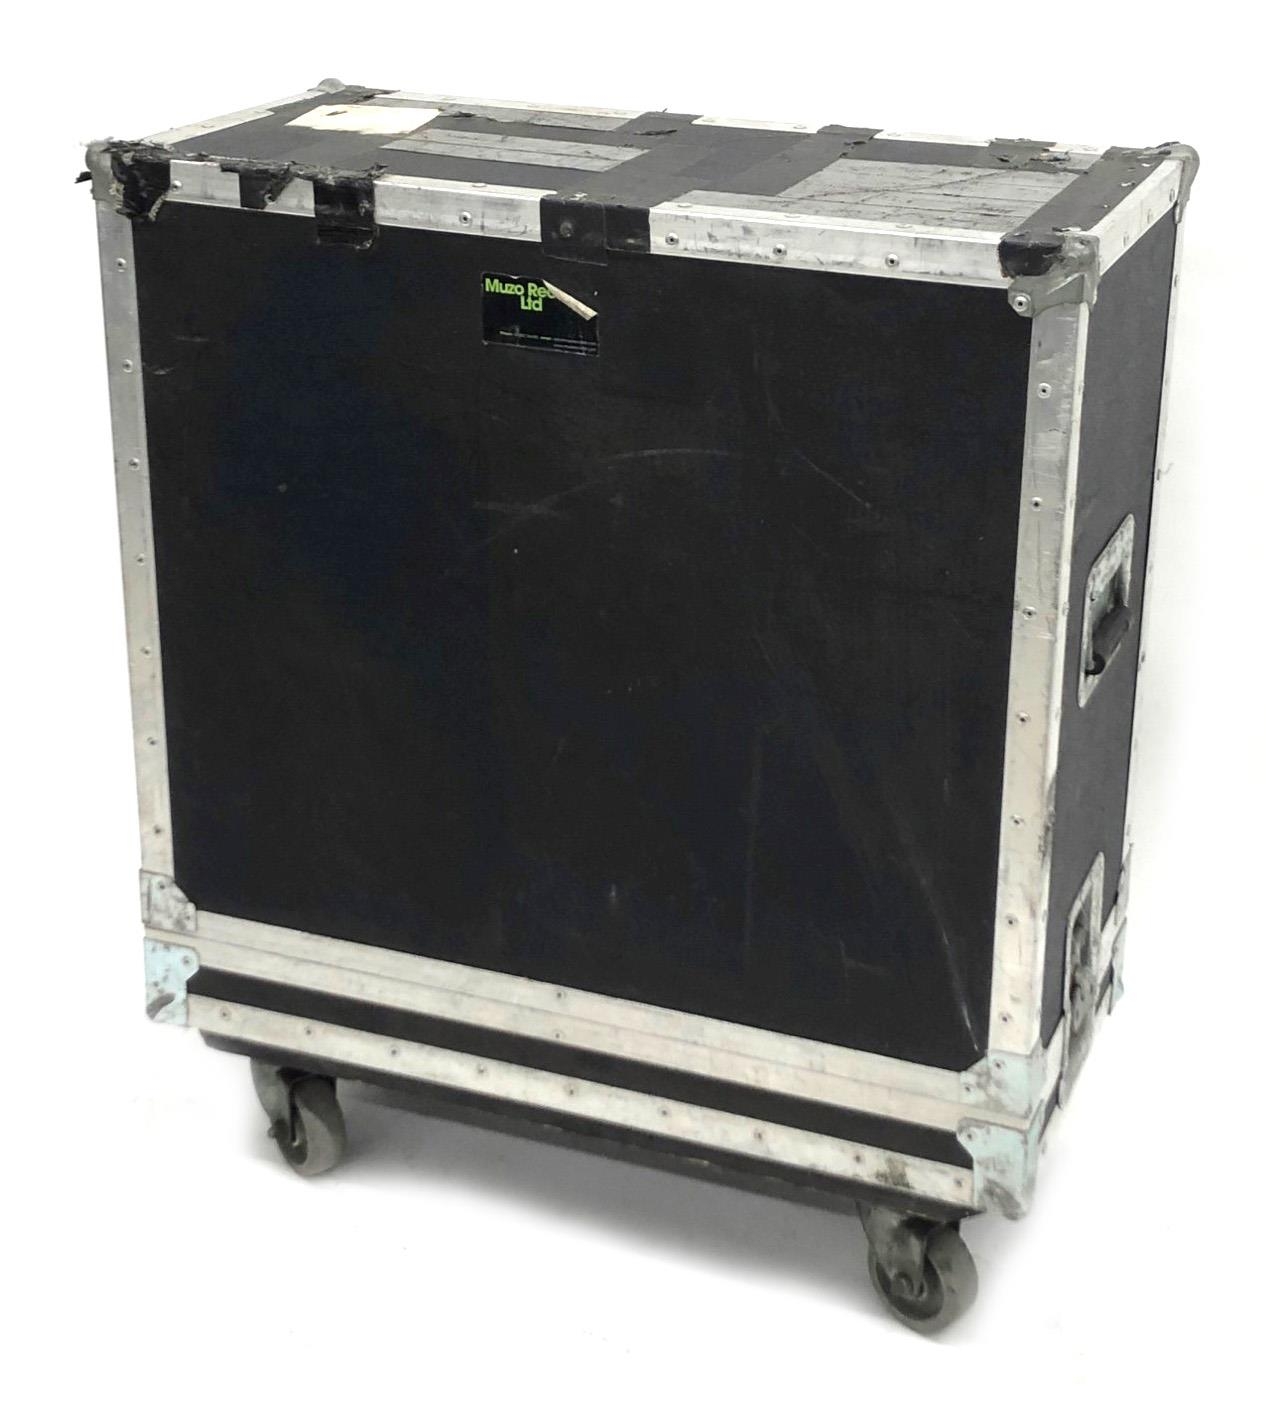 Suede - amplifier flight case on wheels, previously used by the band Suede *Acquired by the vendor